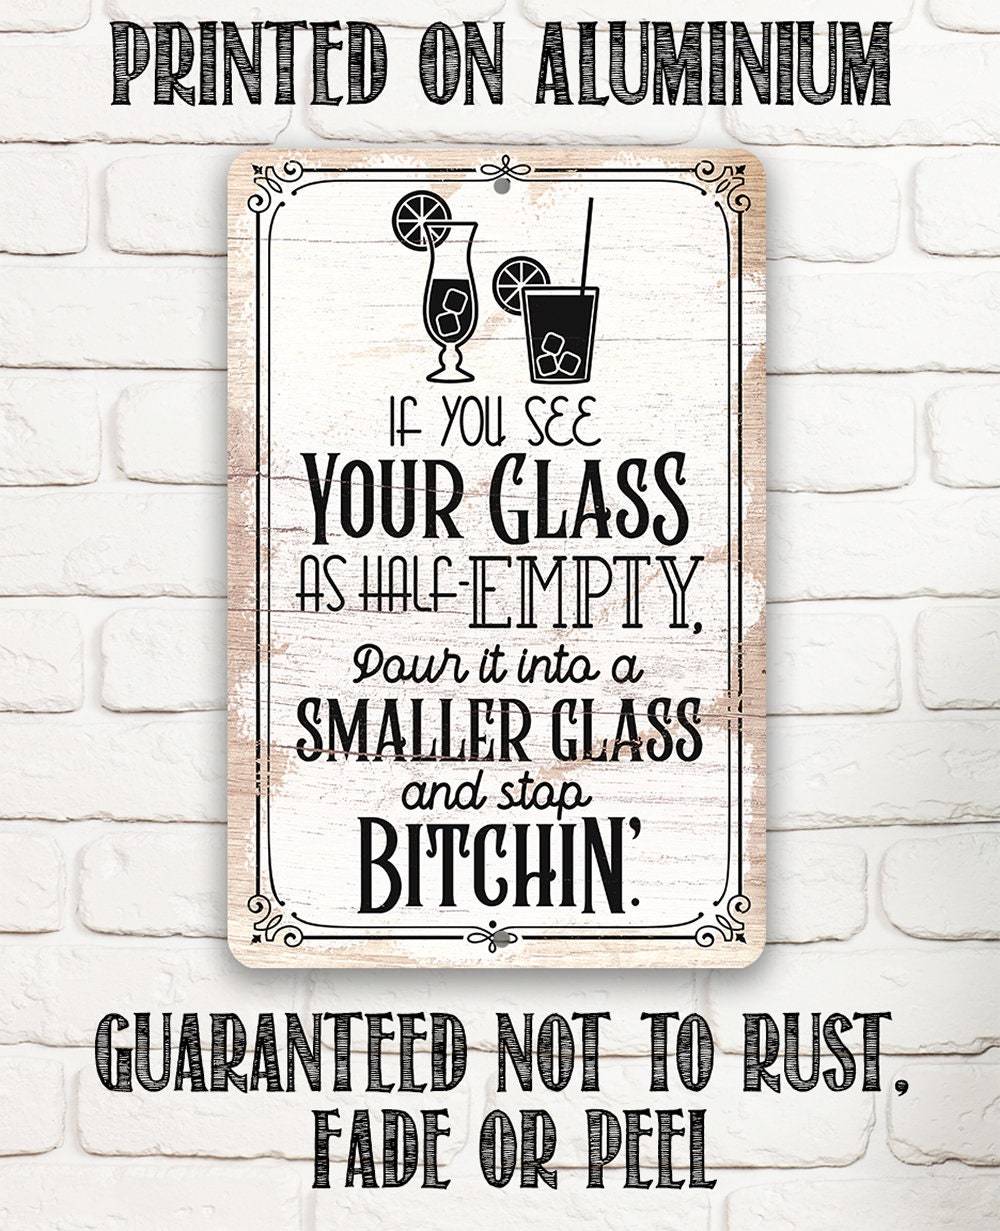 Glass as Half-Empty Pour it into a Smaller Glass - Metal Sign | Lone Star Art.